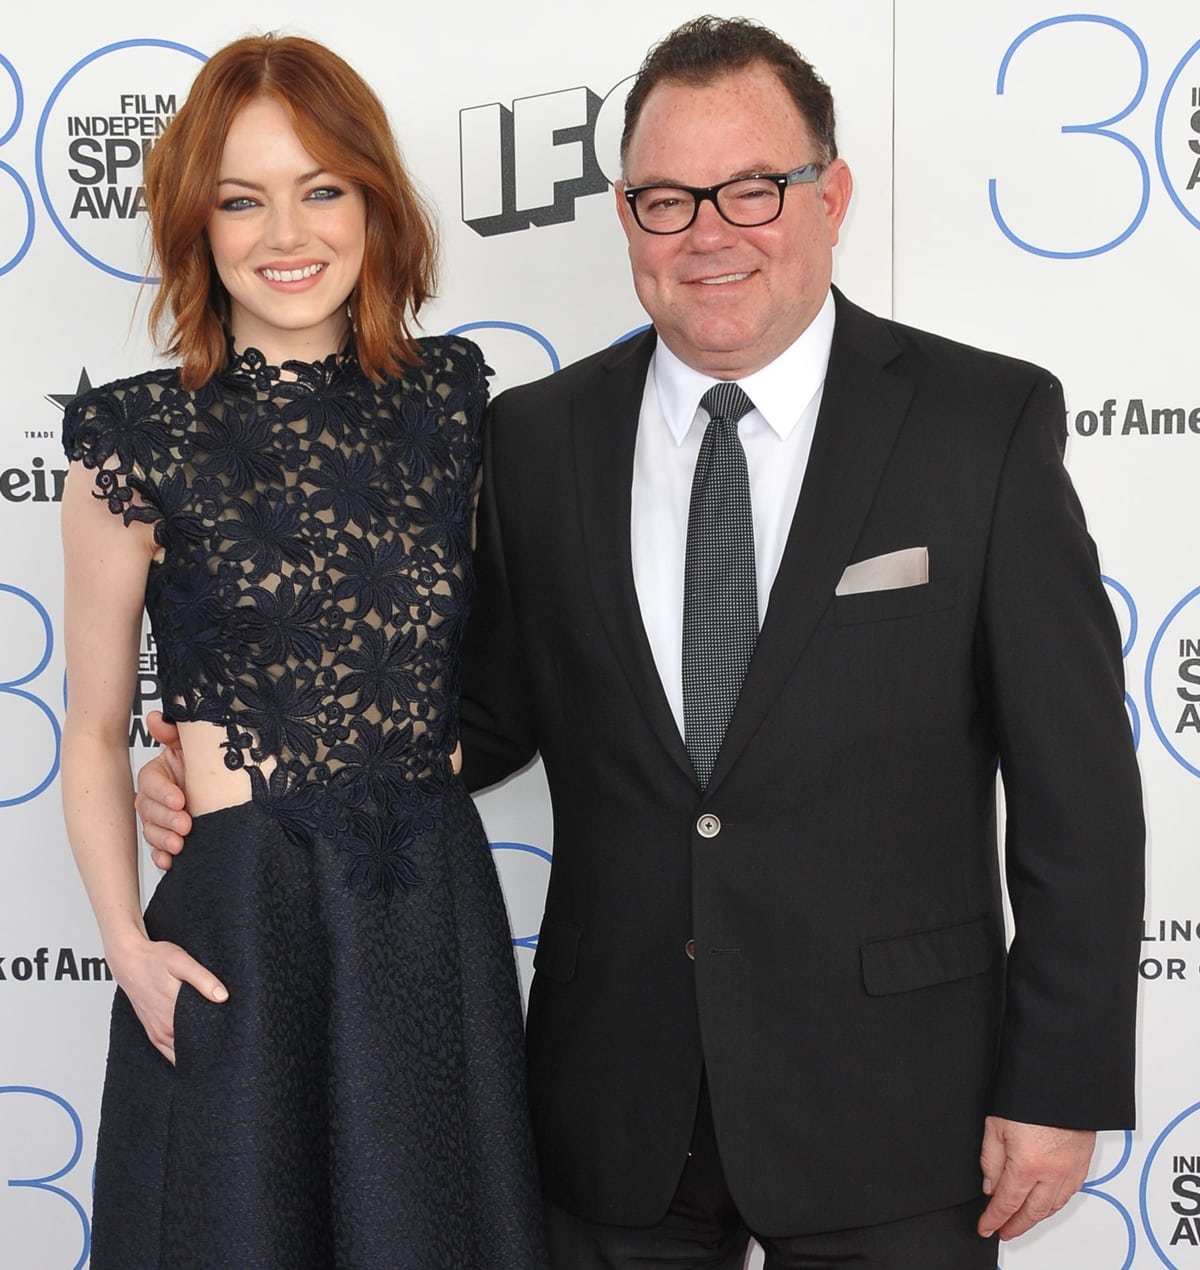 Emma Stone with her father, Jeffrey “Jeff” Charles Stone, who’s the founder and CEO of a general contracting company